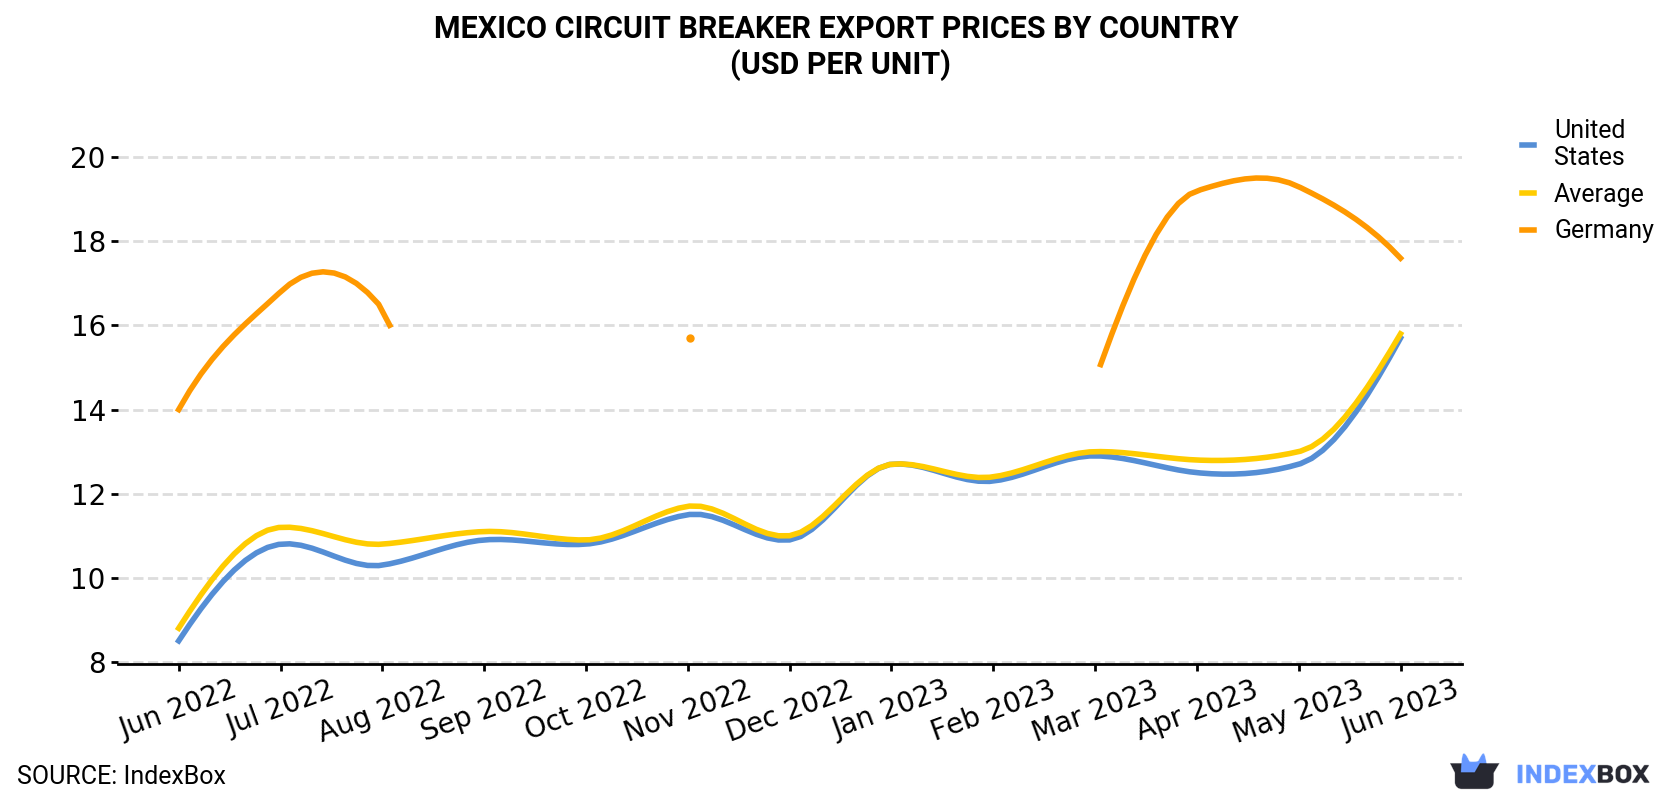 Mexico Circuit Breaker Export Prices By Country (USD Per Unit)